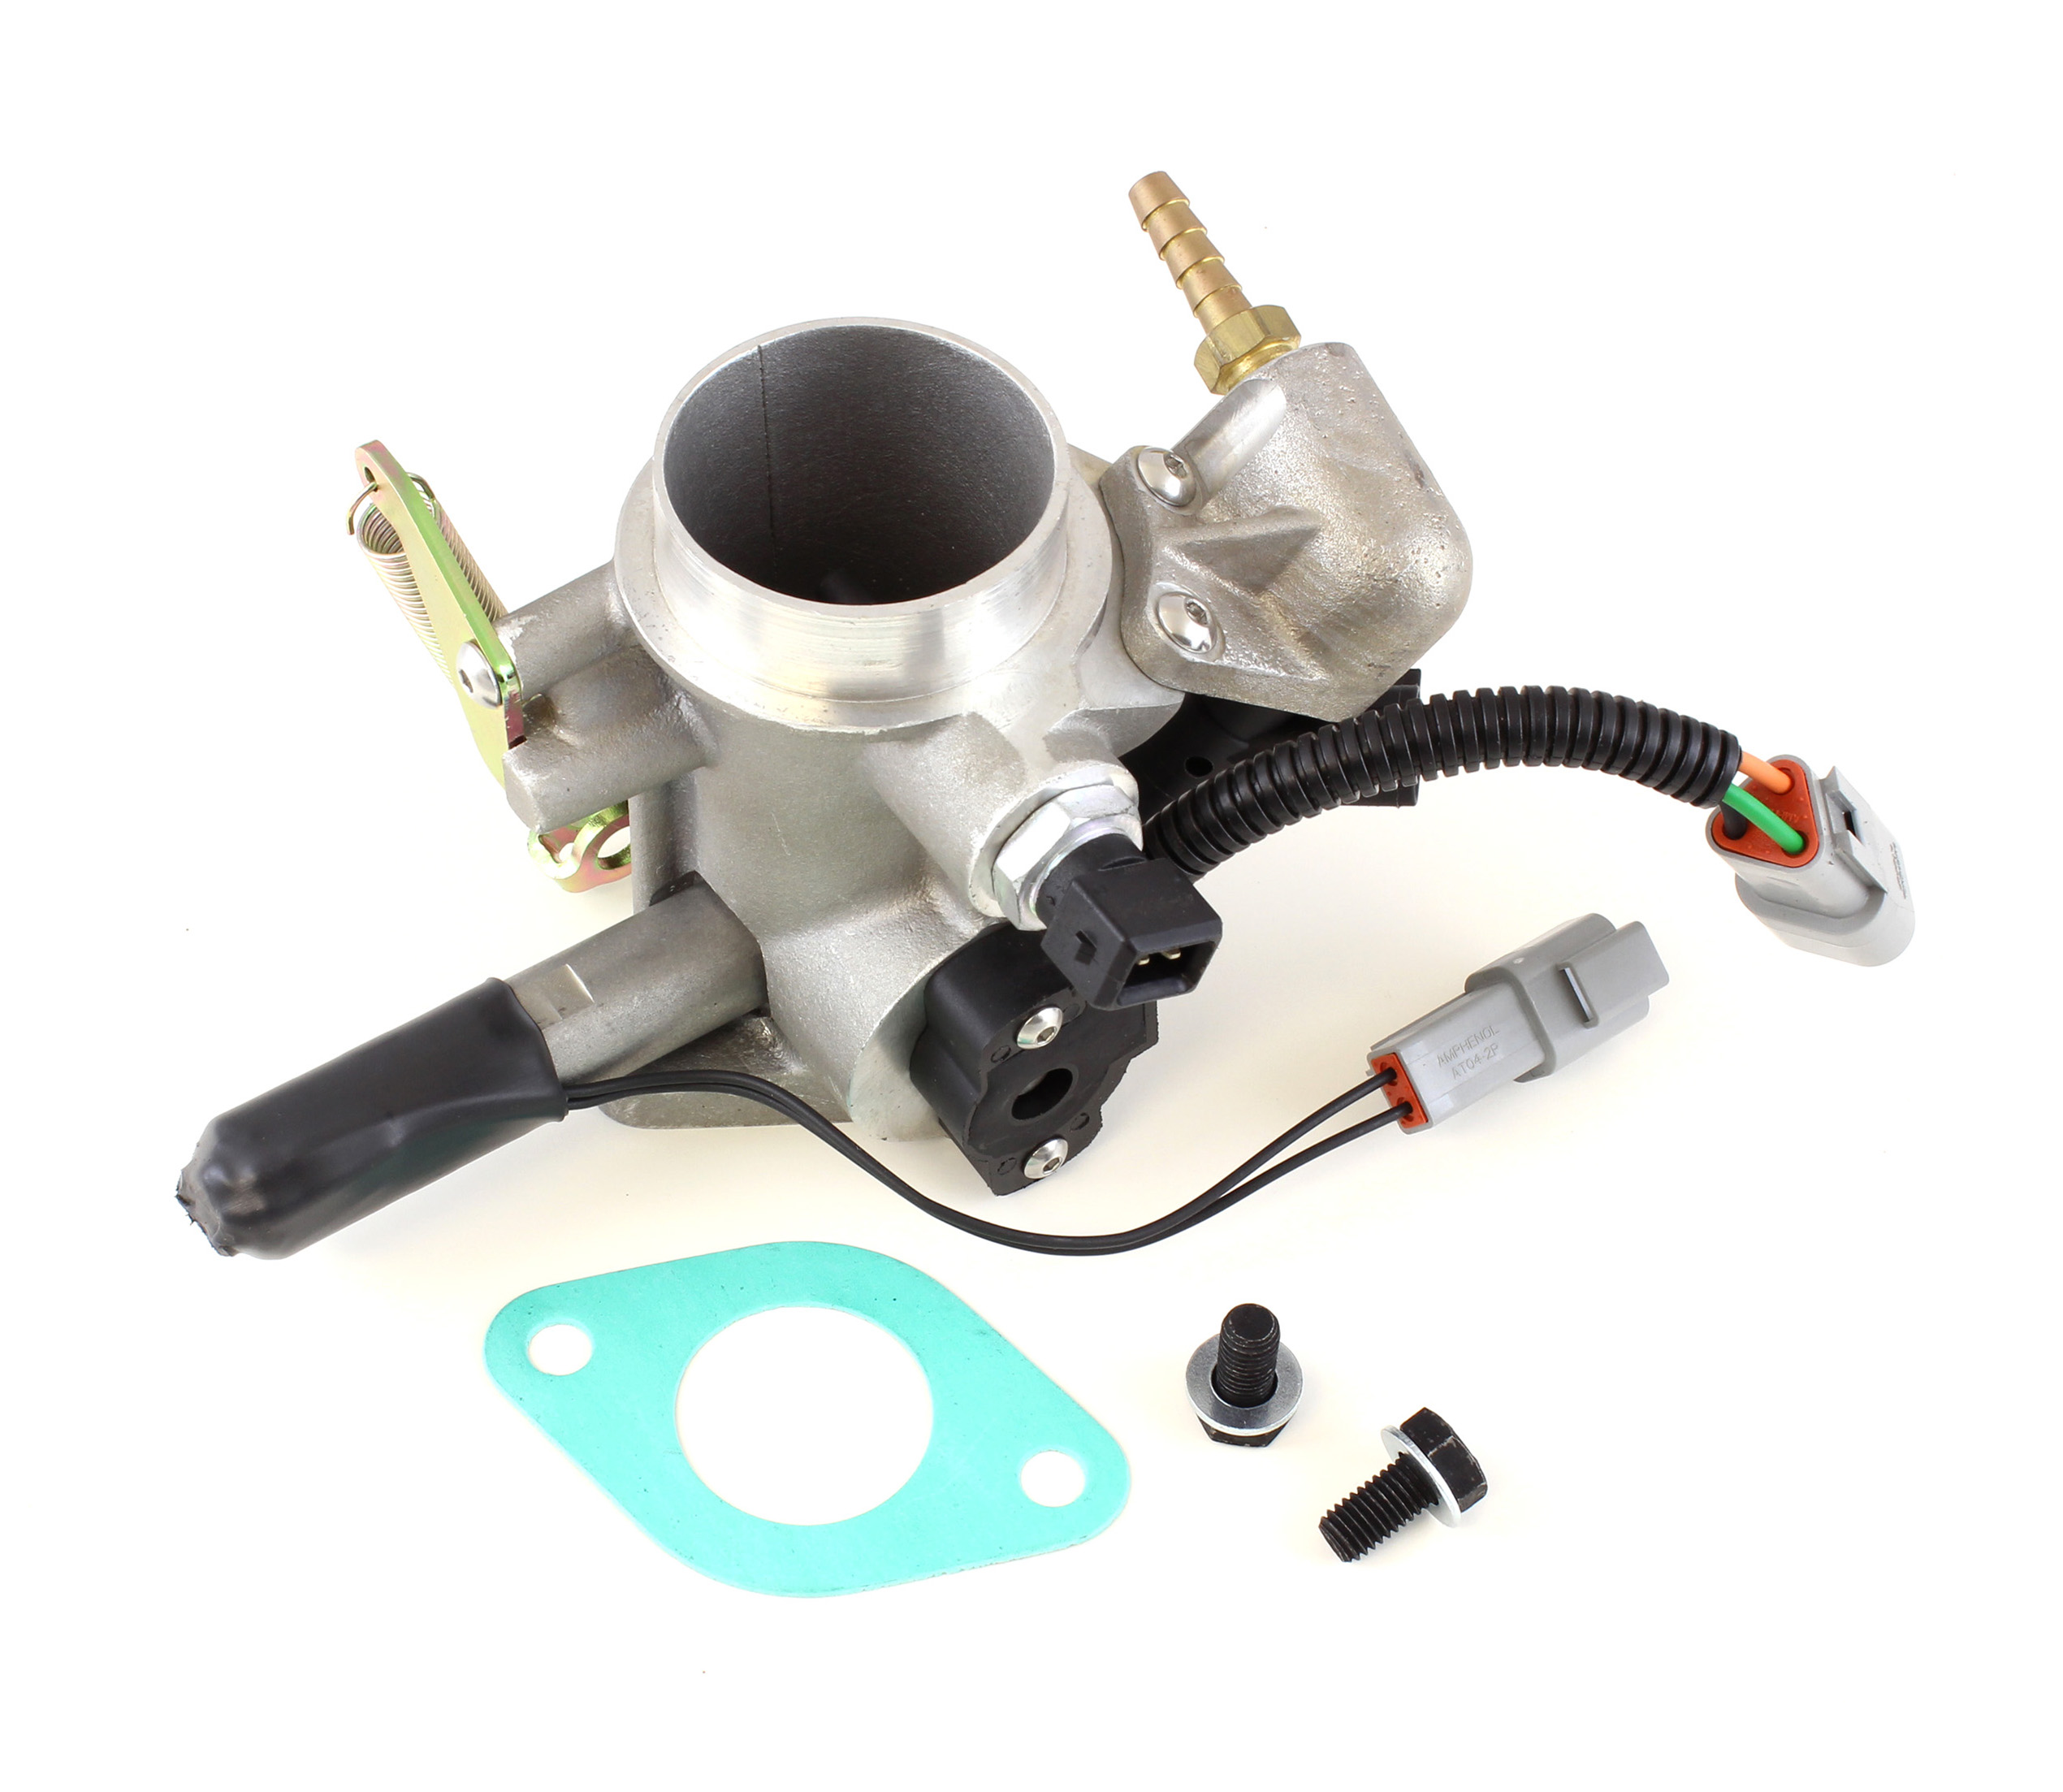 FIS2-001 Fuel Injection System, Type 1 VW